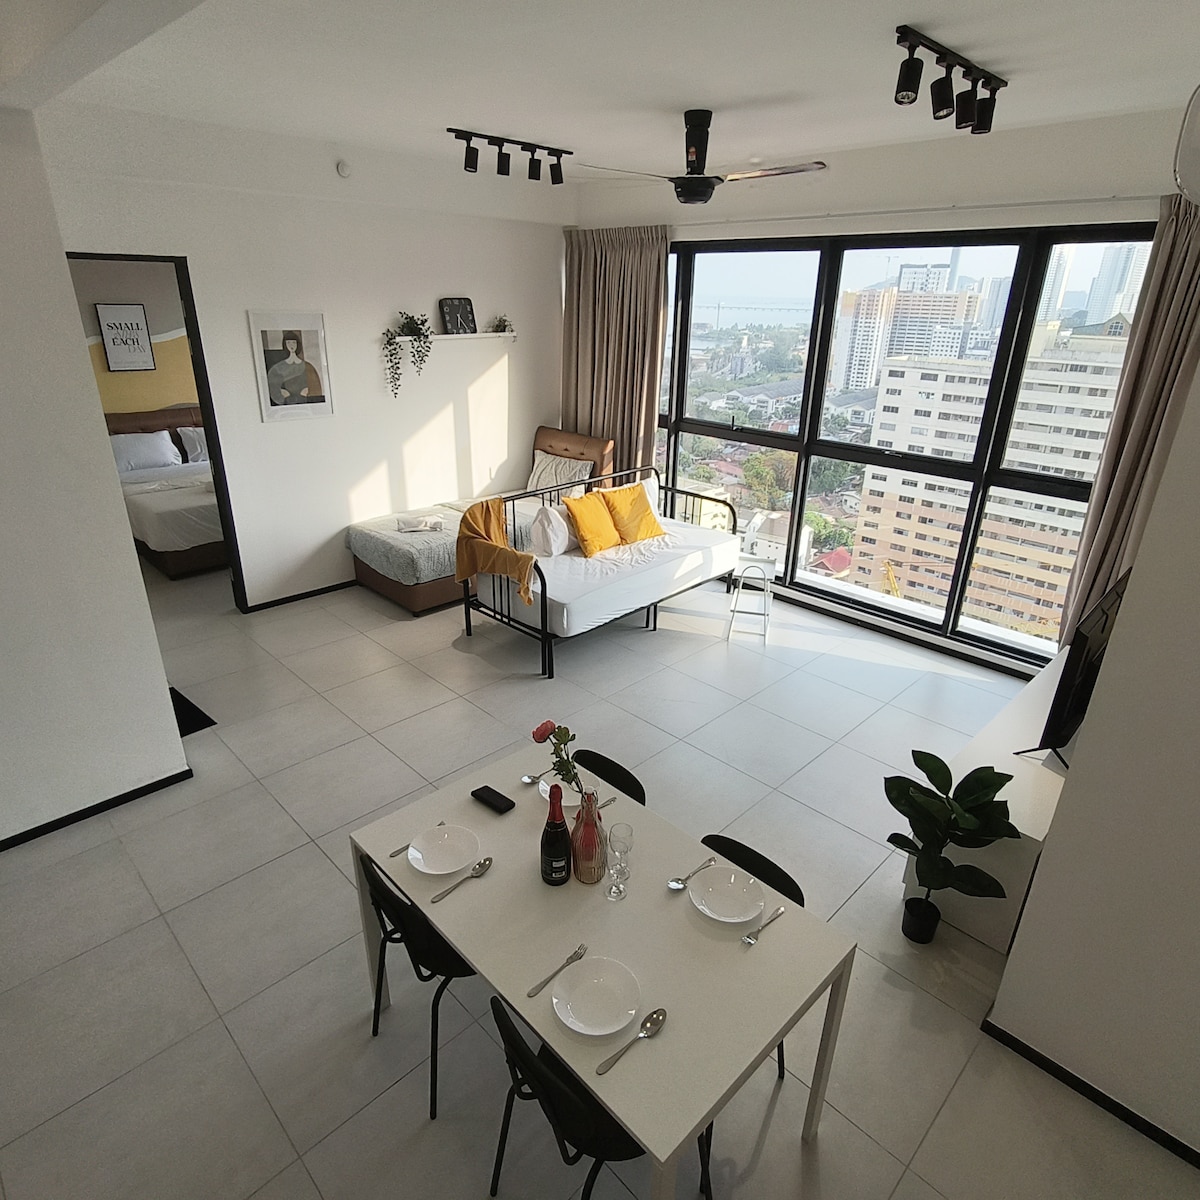 (New) 2BR Swanky Homestay @ Urban Suites 10pax